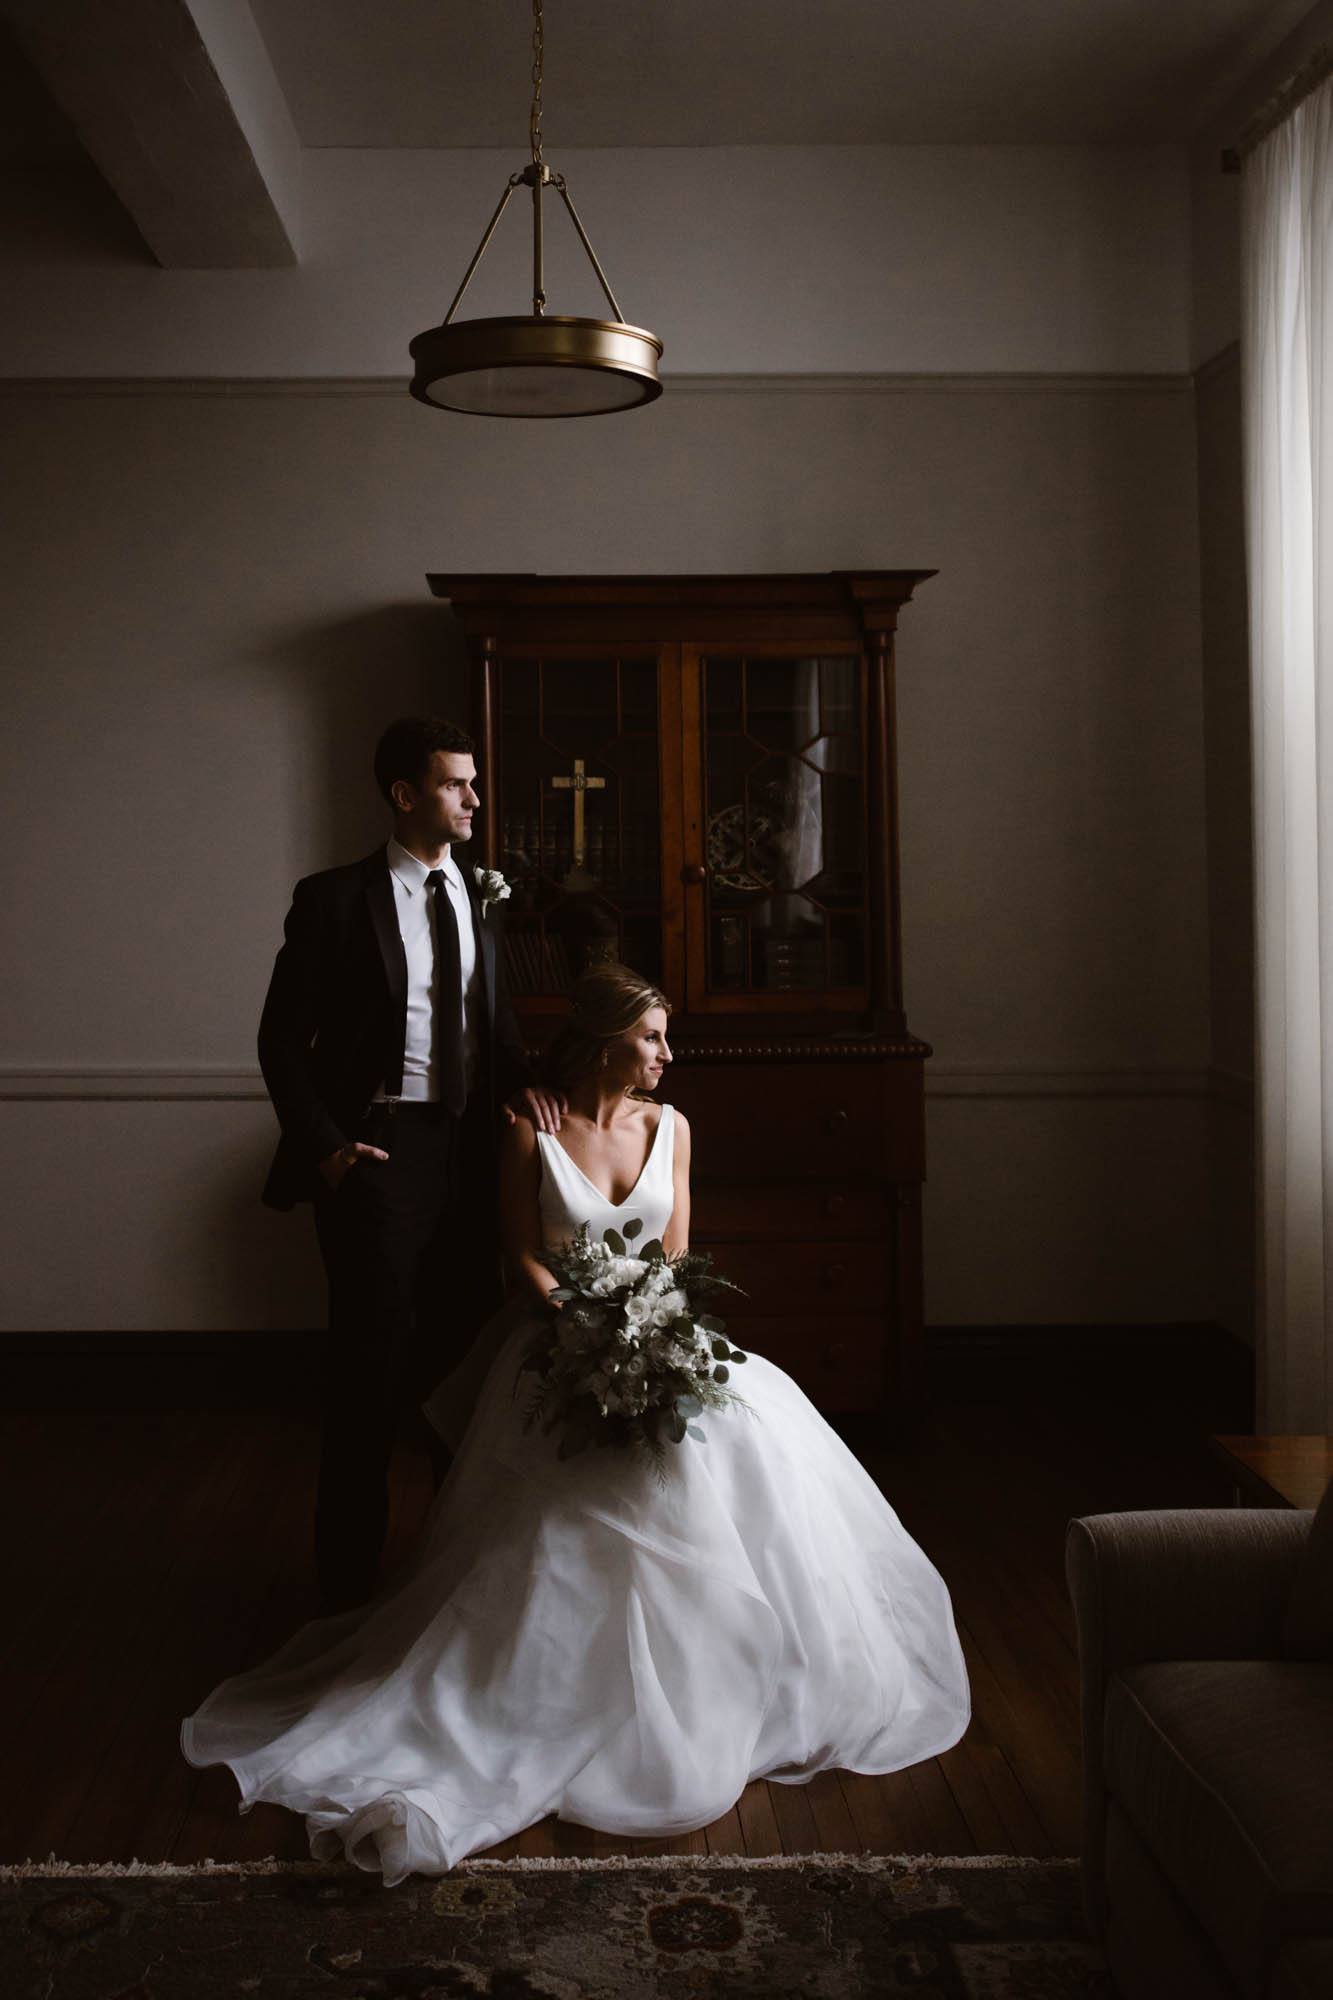 A bride and groom posing for a classic wedding portrait